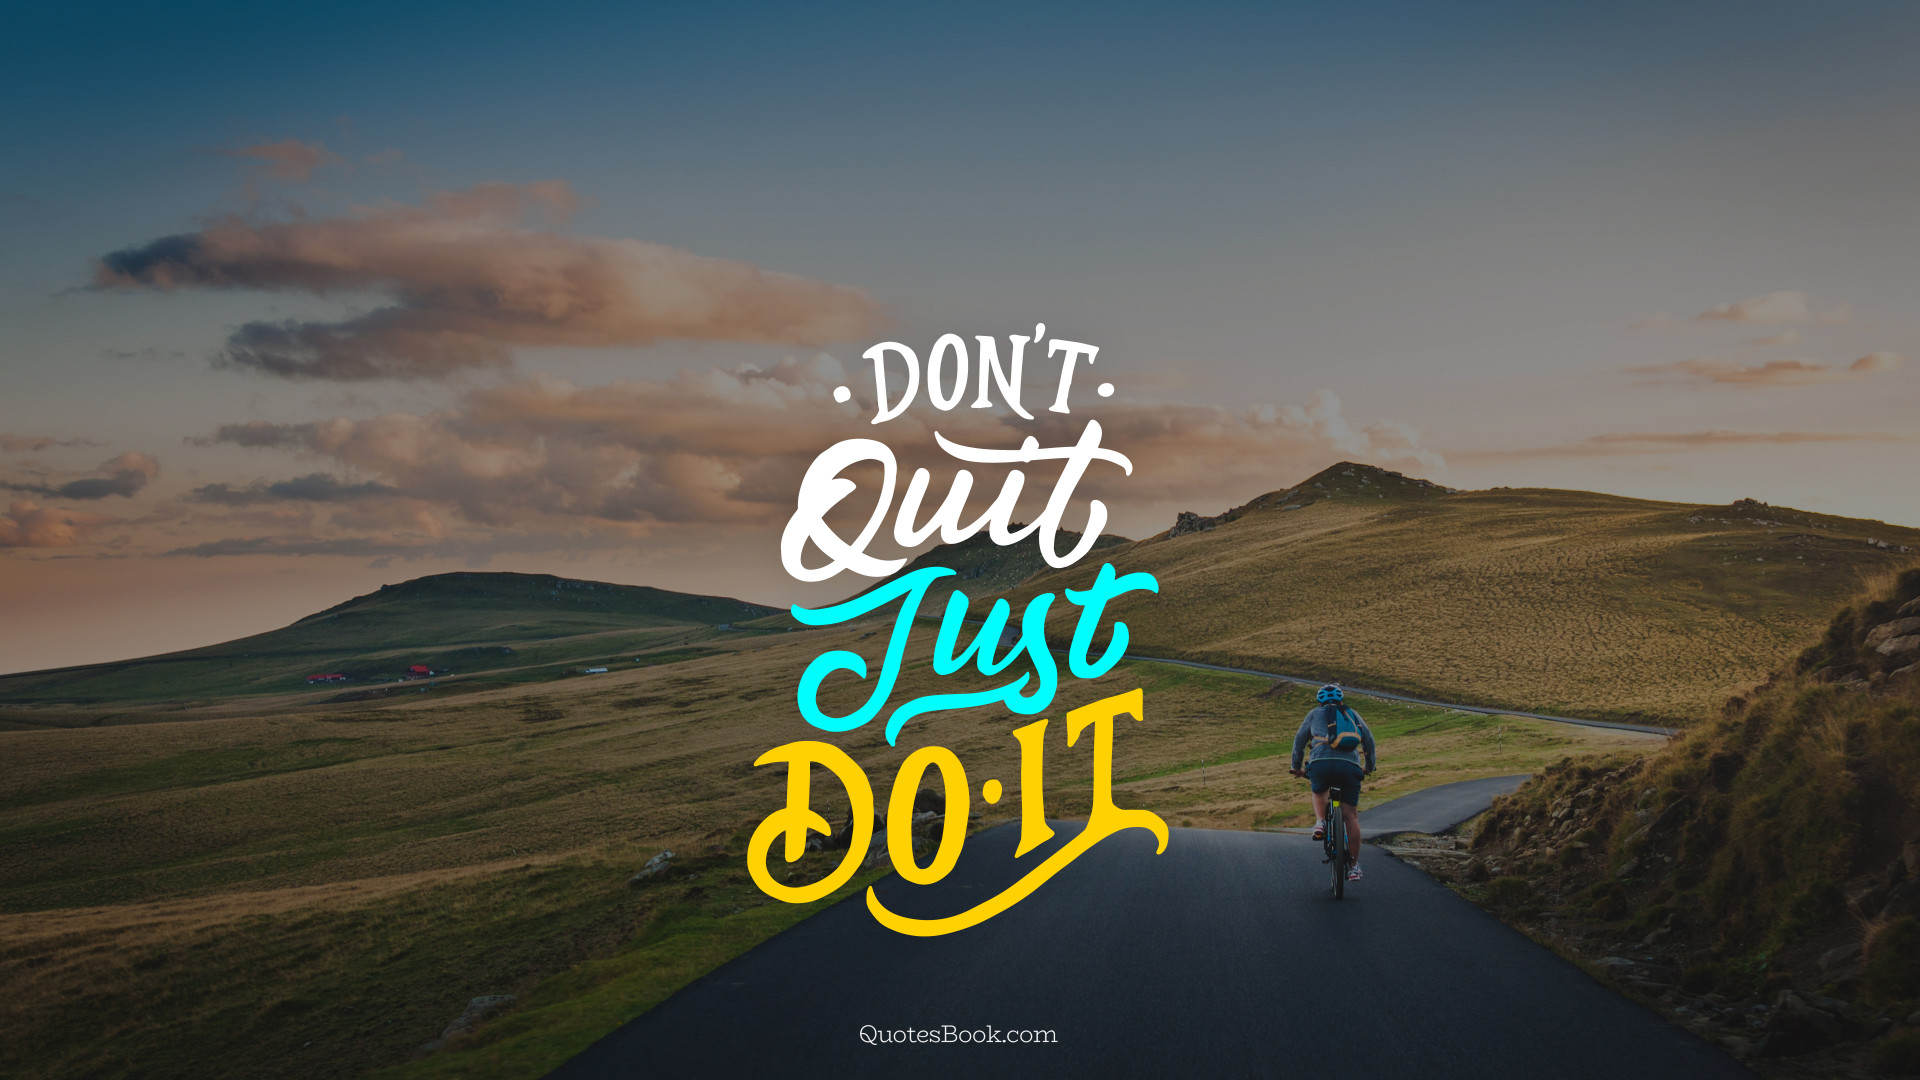 Don't quit just do it QuotesBook